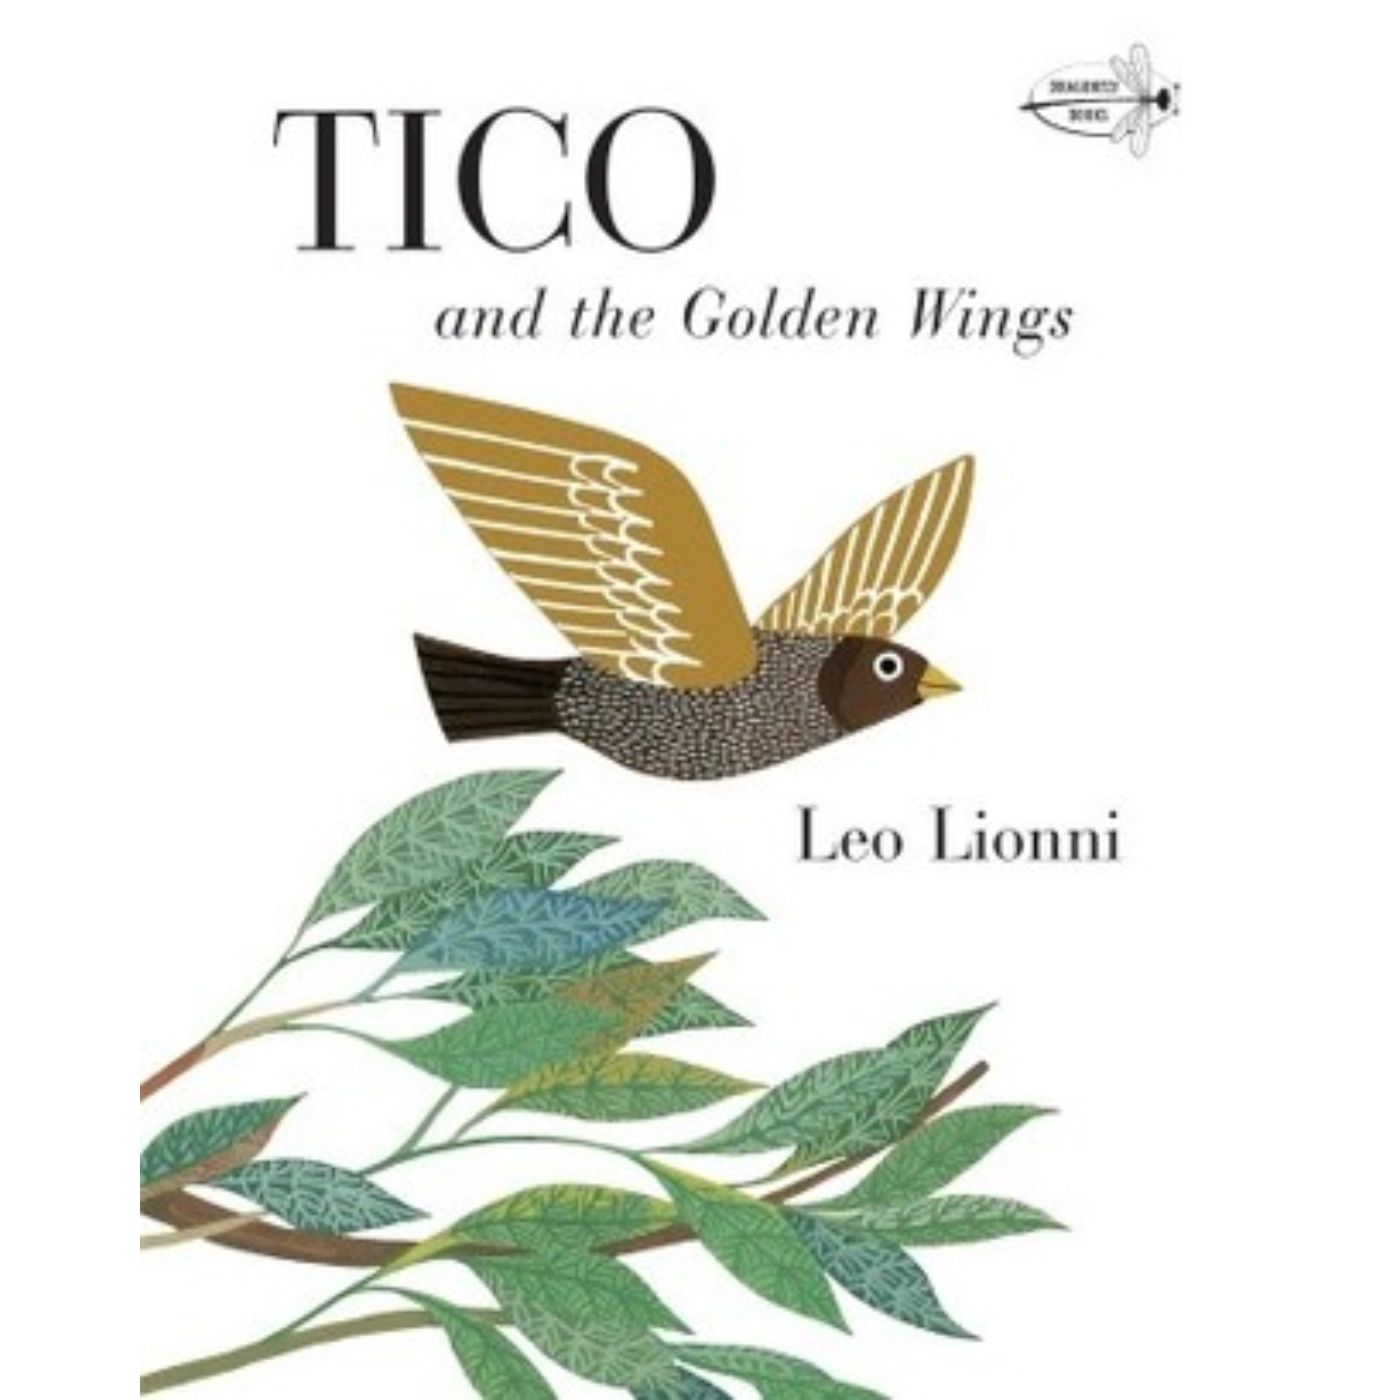 Tico and the Golden Wings by Leo Lionni - Read by Martyn Kenneth